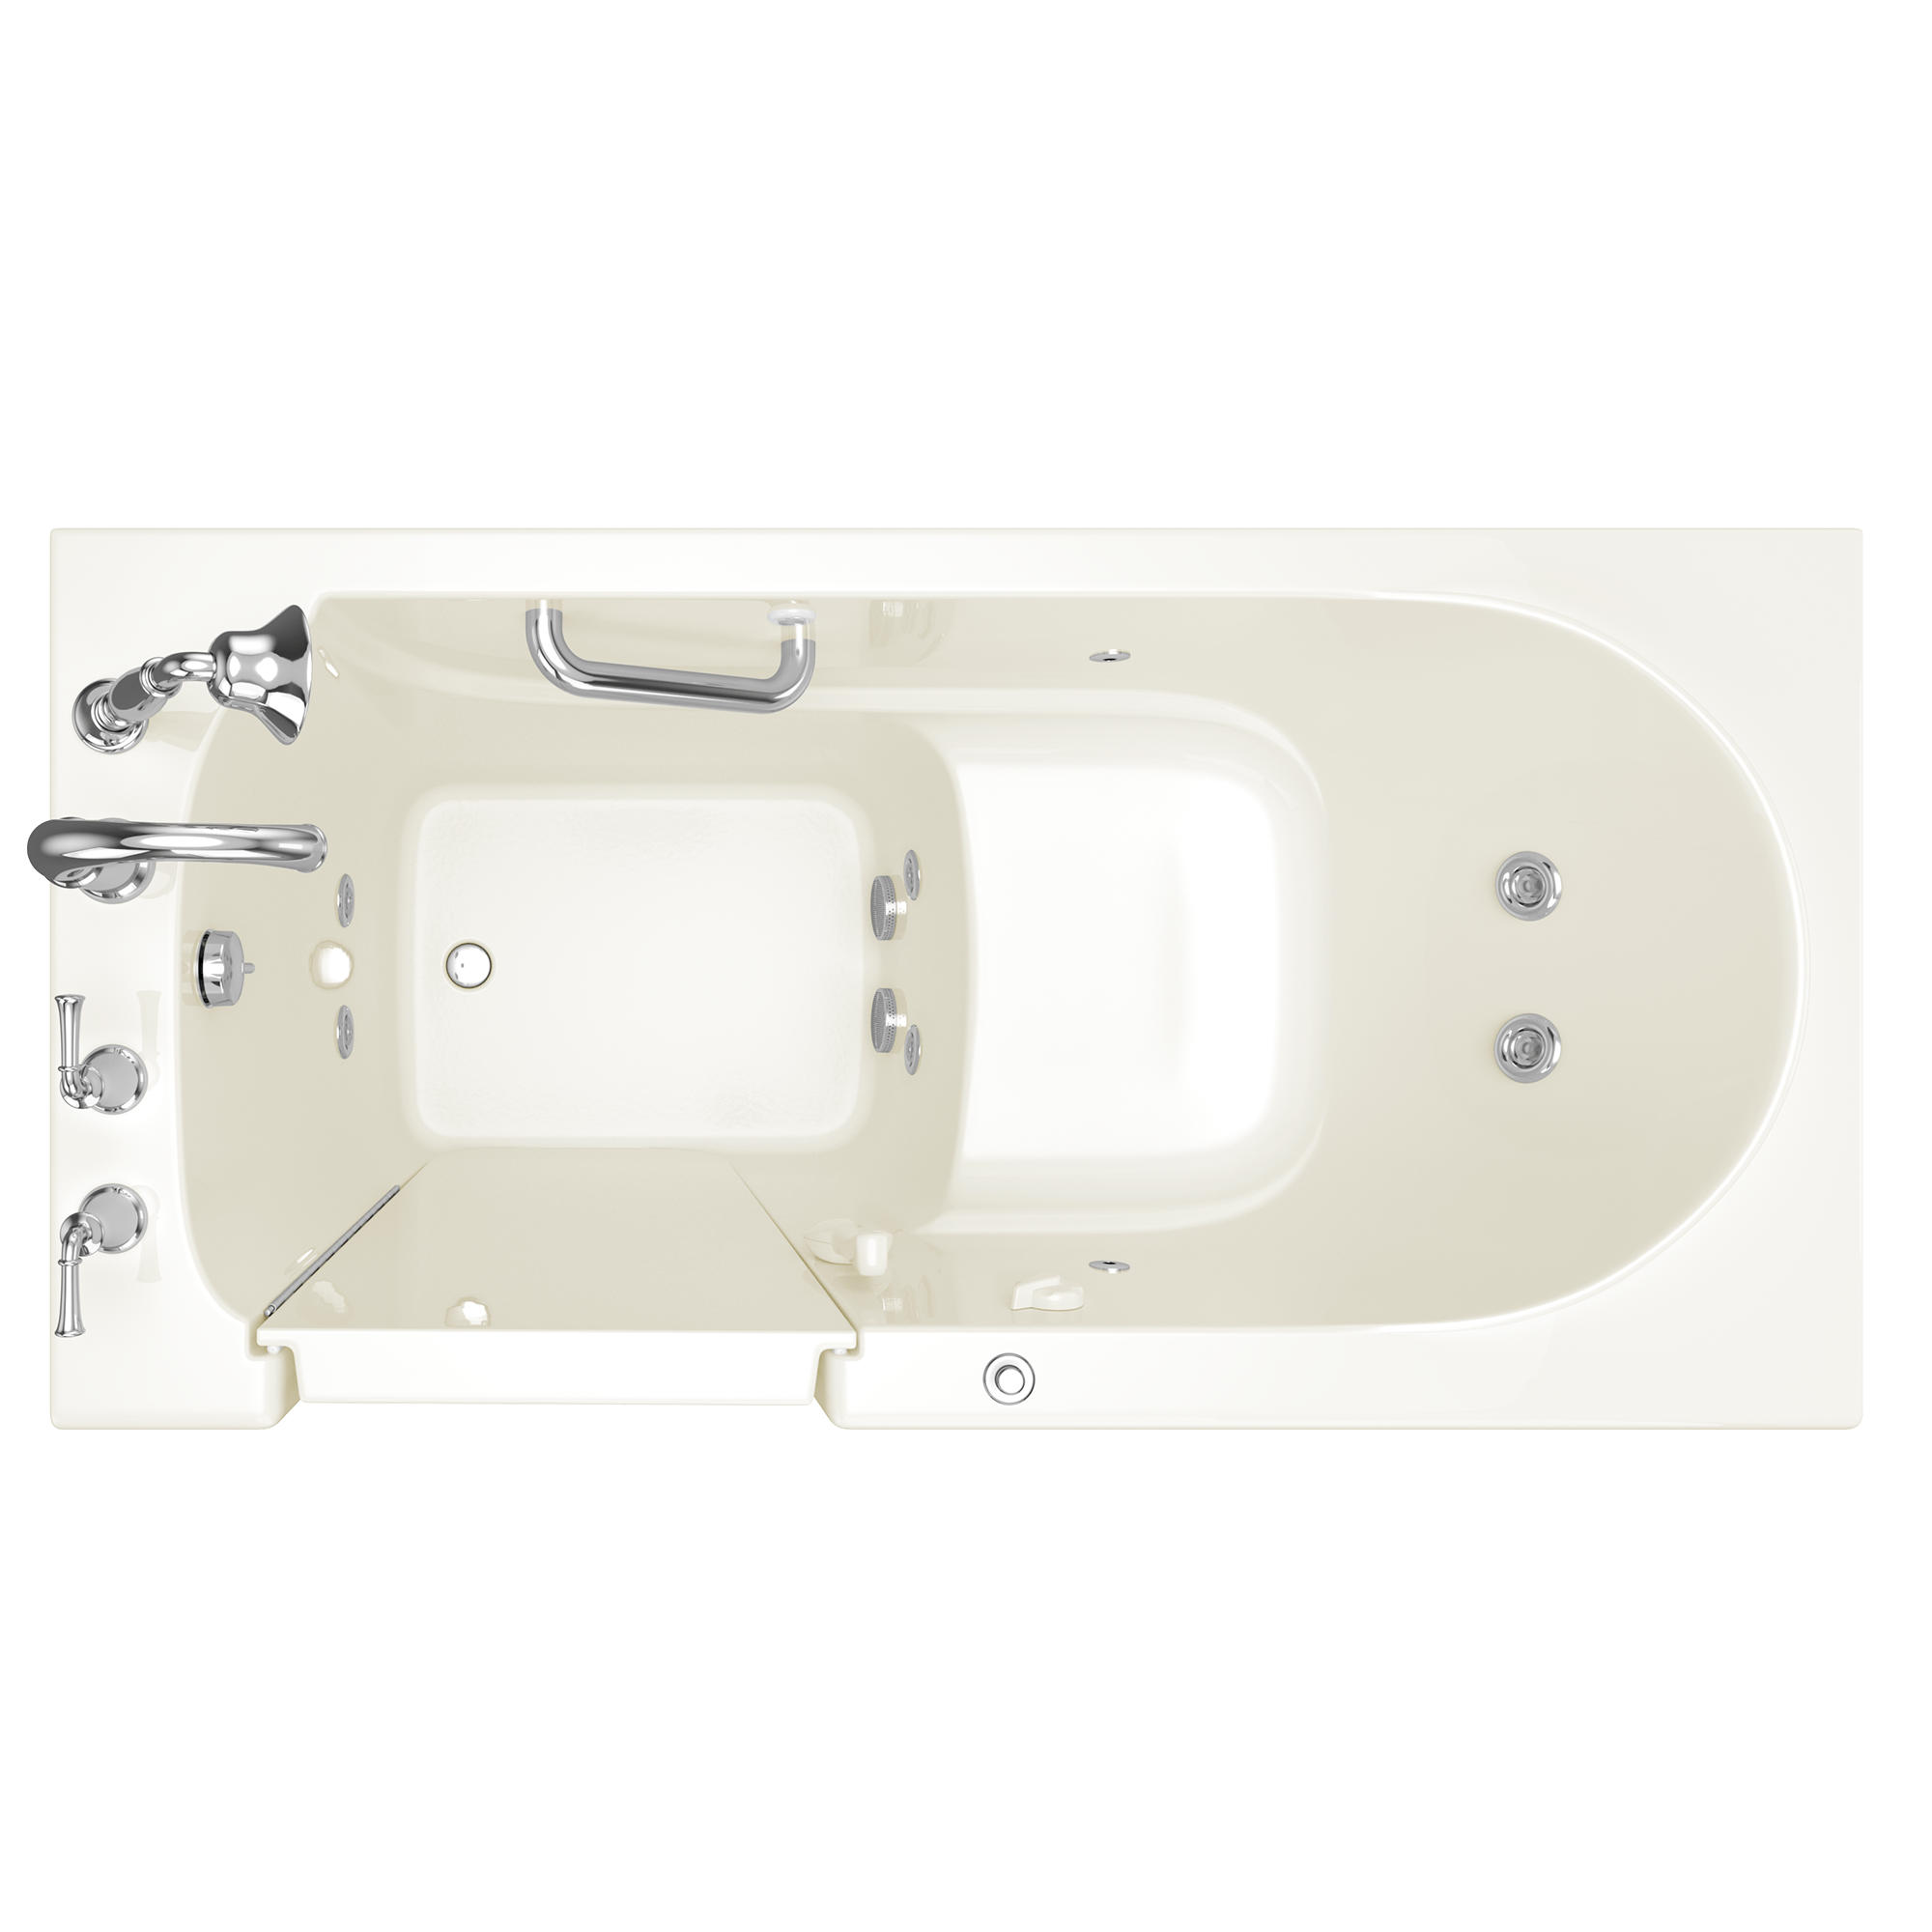 Gelcoat Value Series 60x30-Inch Walk-In Bathtub with Whirlpool Massage System - Left Hand Door and Drain